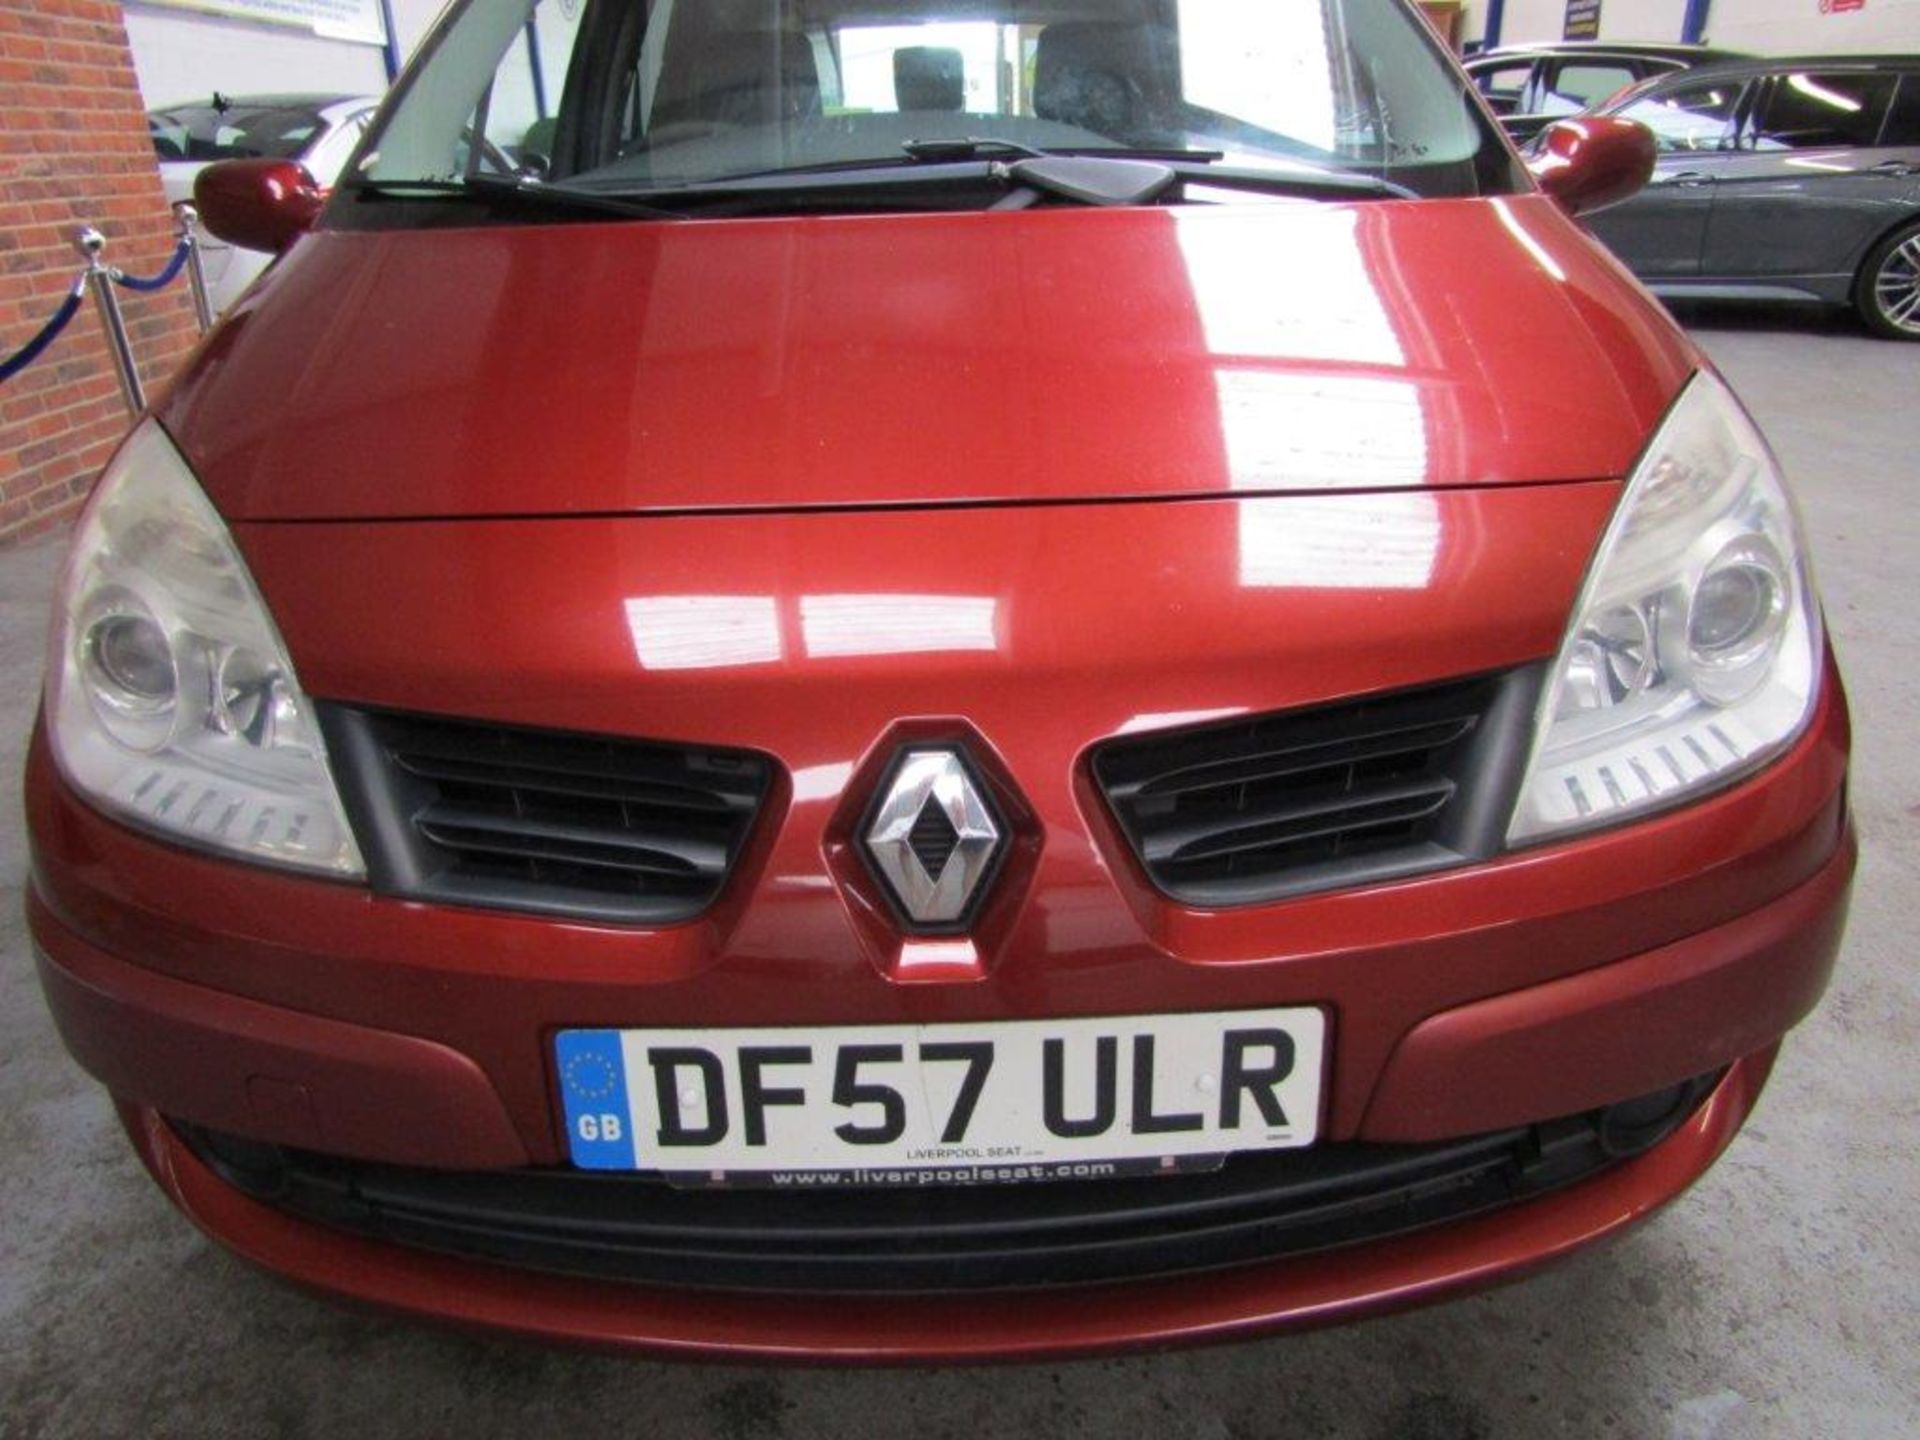 57 08 Renault Scenic Extreme VVT - Image 4 of 20